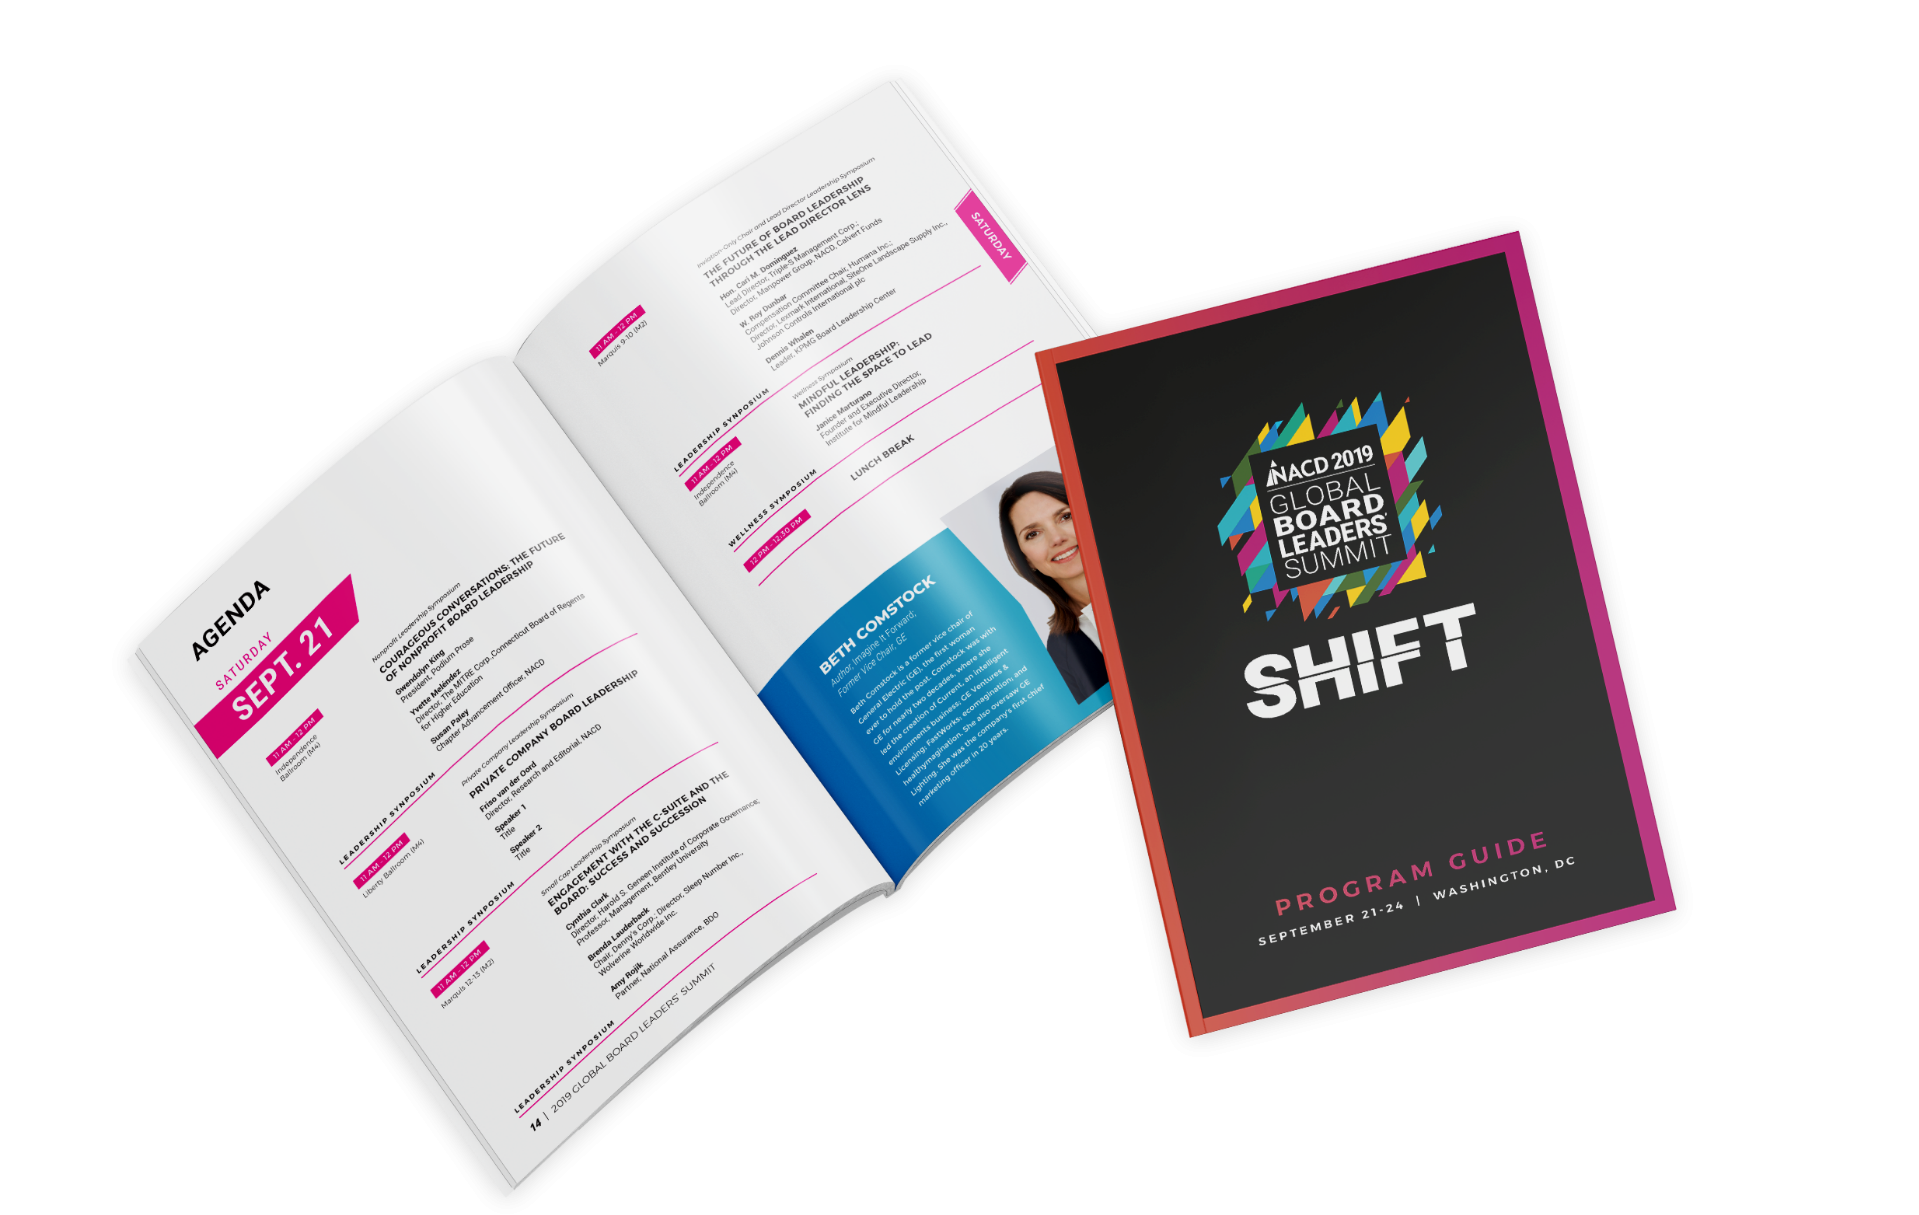 An open program guide for a professional event titled "NACD Shift," showcasing the schedule for September 12 on the left and a vibrant cover design on the right.